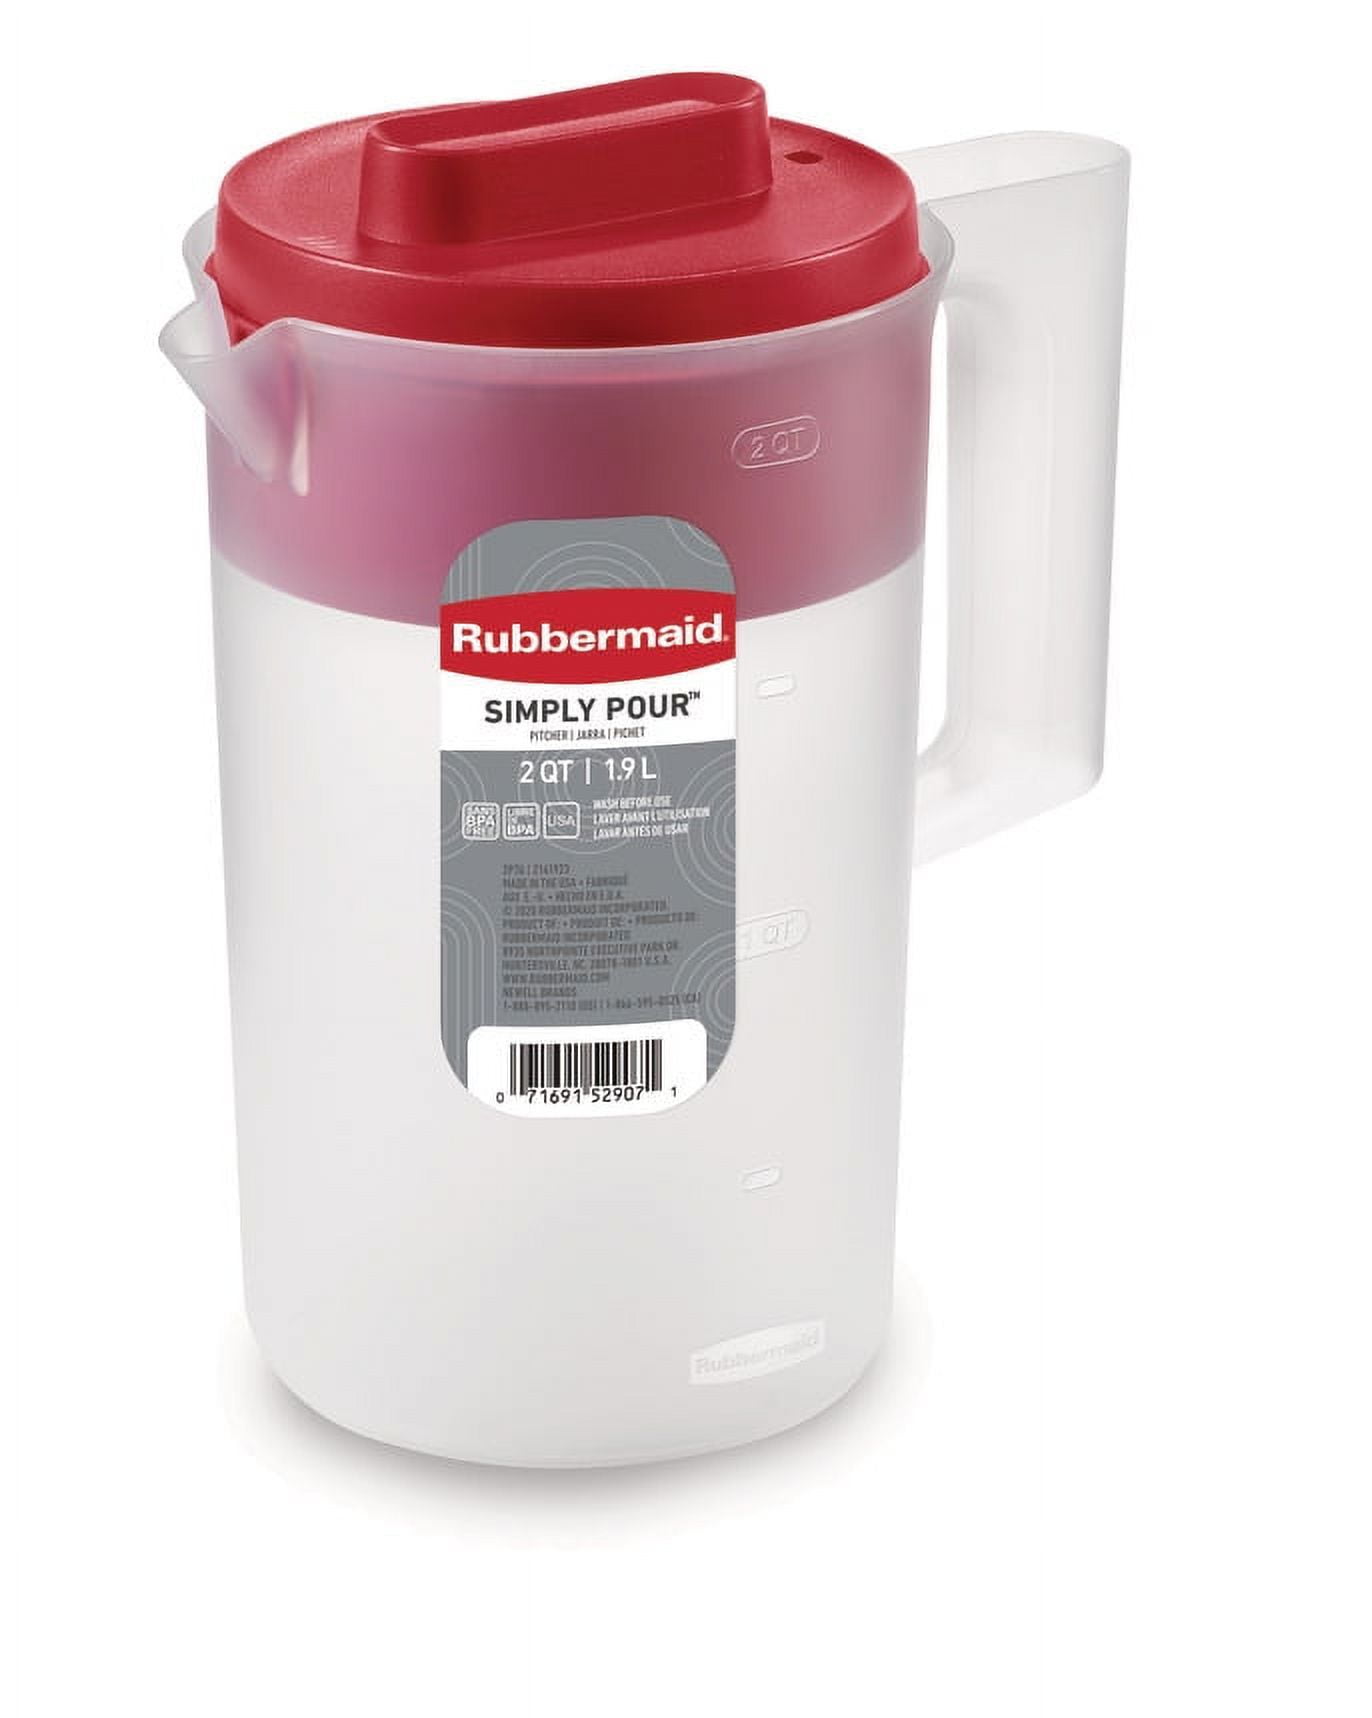 Rubbermaid Simply Pour Pitcher - Clear/Red, 1 gal - Gerbes Super Markets